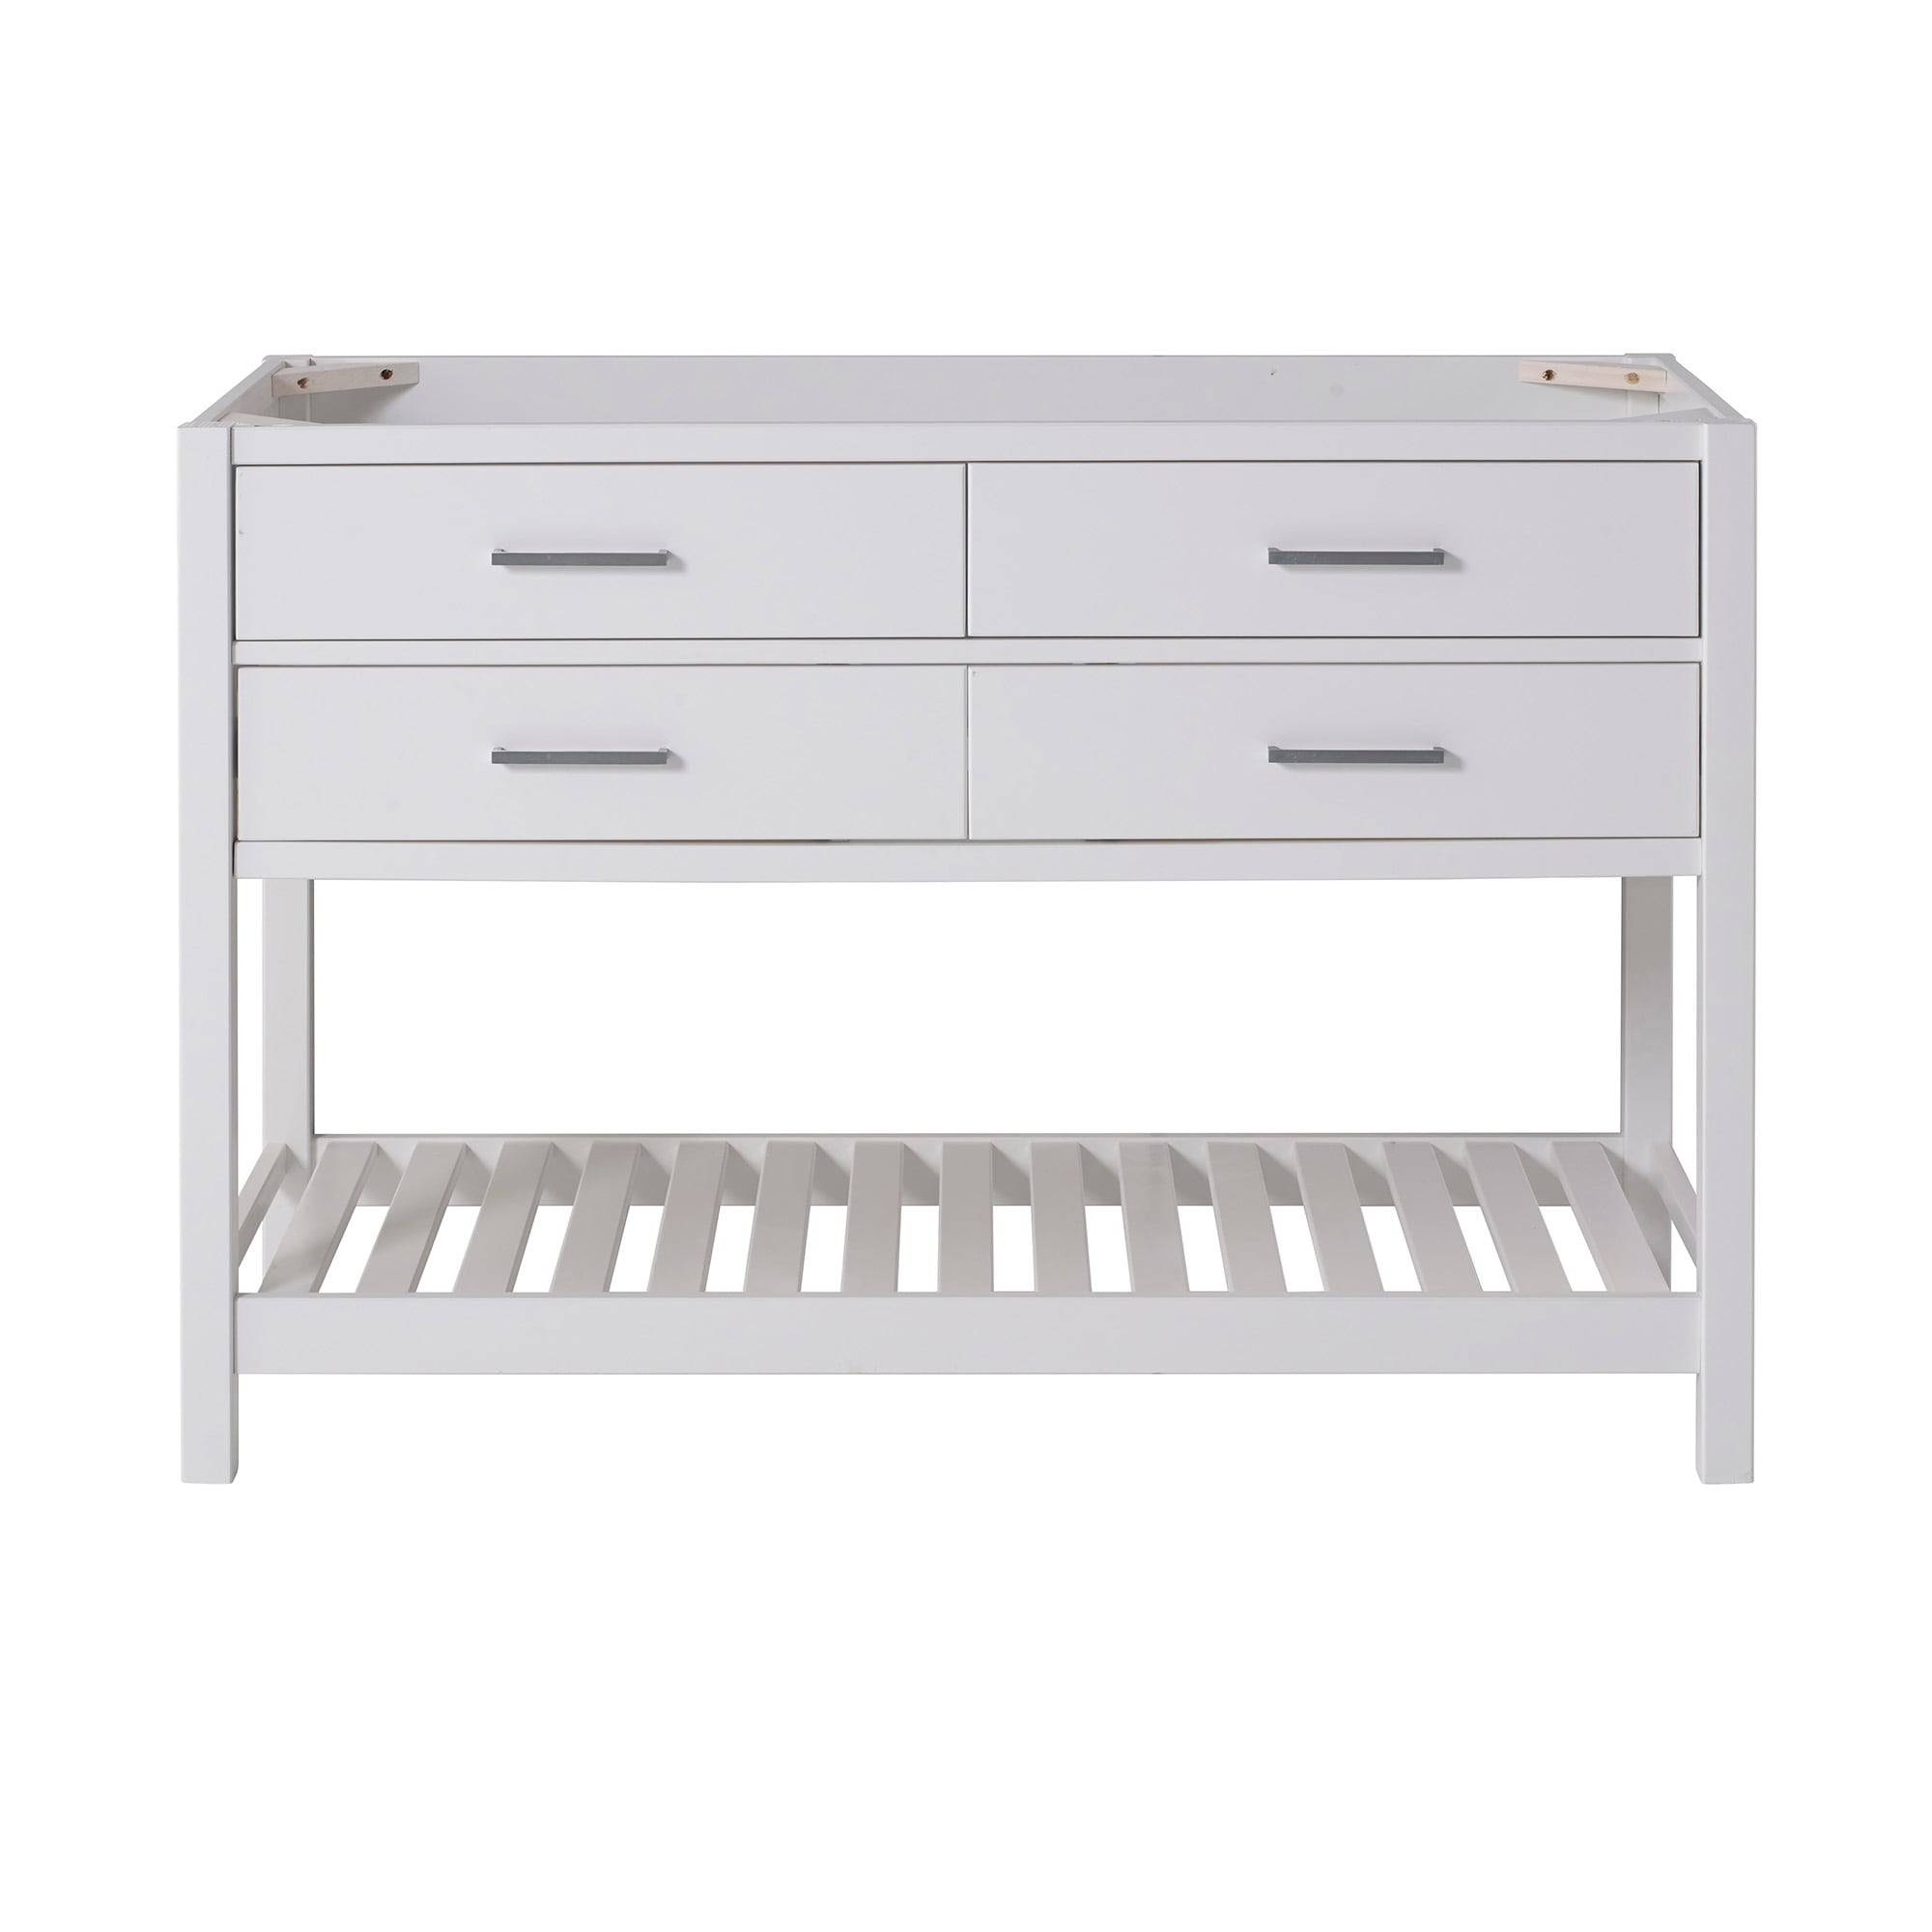 Alaterre Furniture Bathroom Vanities without Tops at Lowes.com